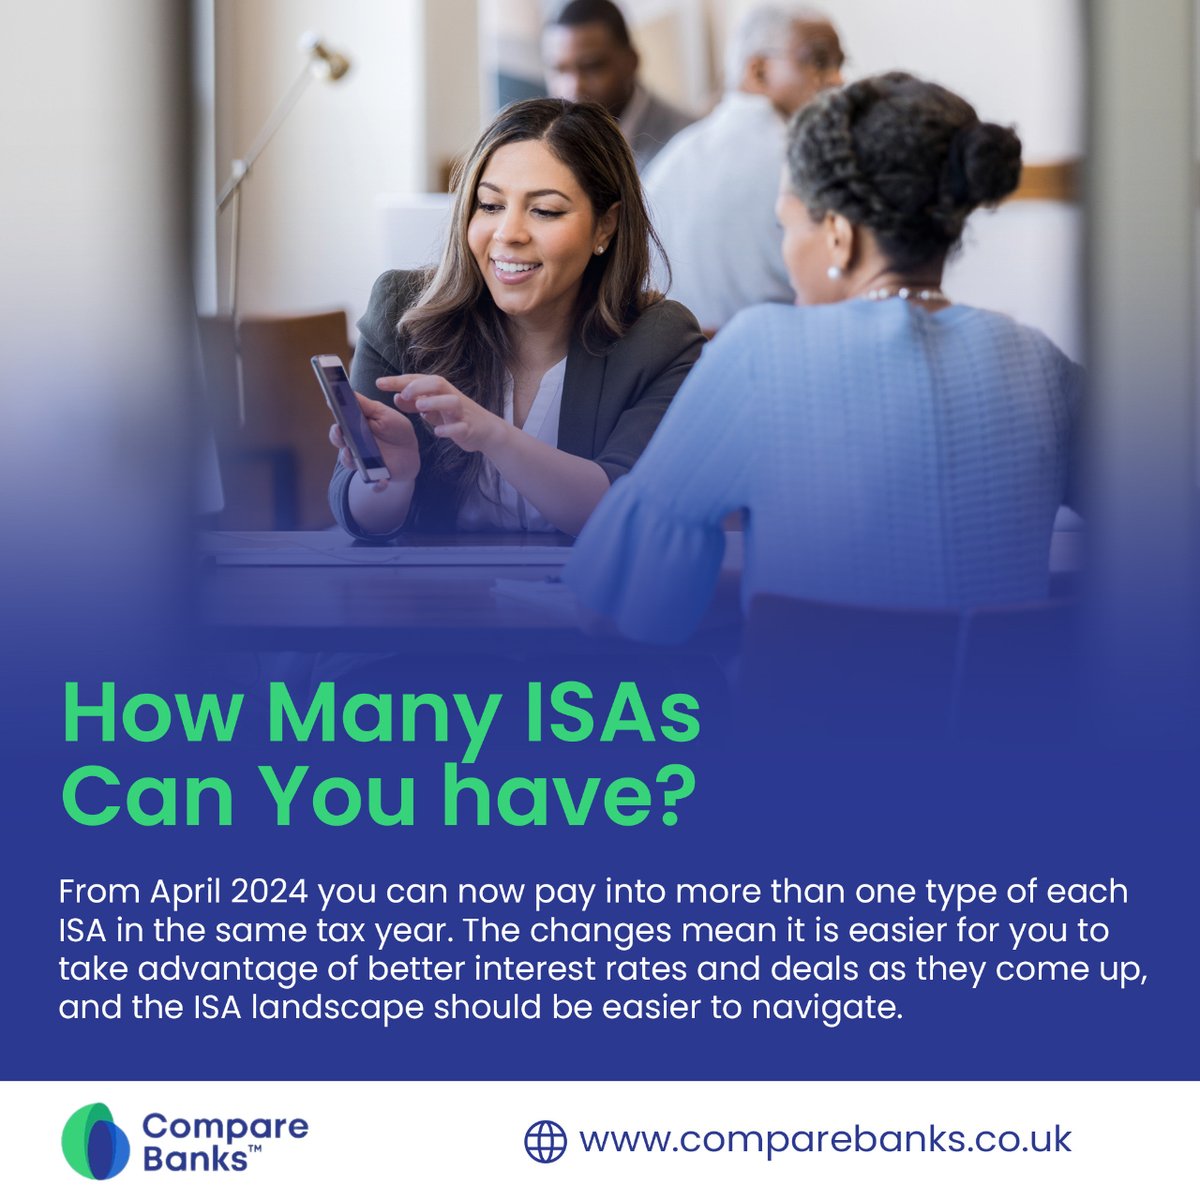 There is nothing to stop you having several ISAs. You can have as many ISAs as you like.

Learn more: comparebanks.co.uk/savings/how-ma…

#financetips #moneymanagement #personalfinance #savingmoney #debtfree #financialfreedom #smartmoney #financialliteracy #moneysaving #banking